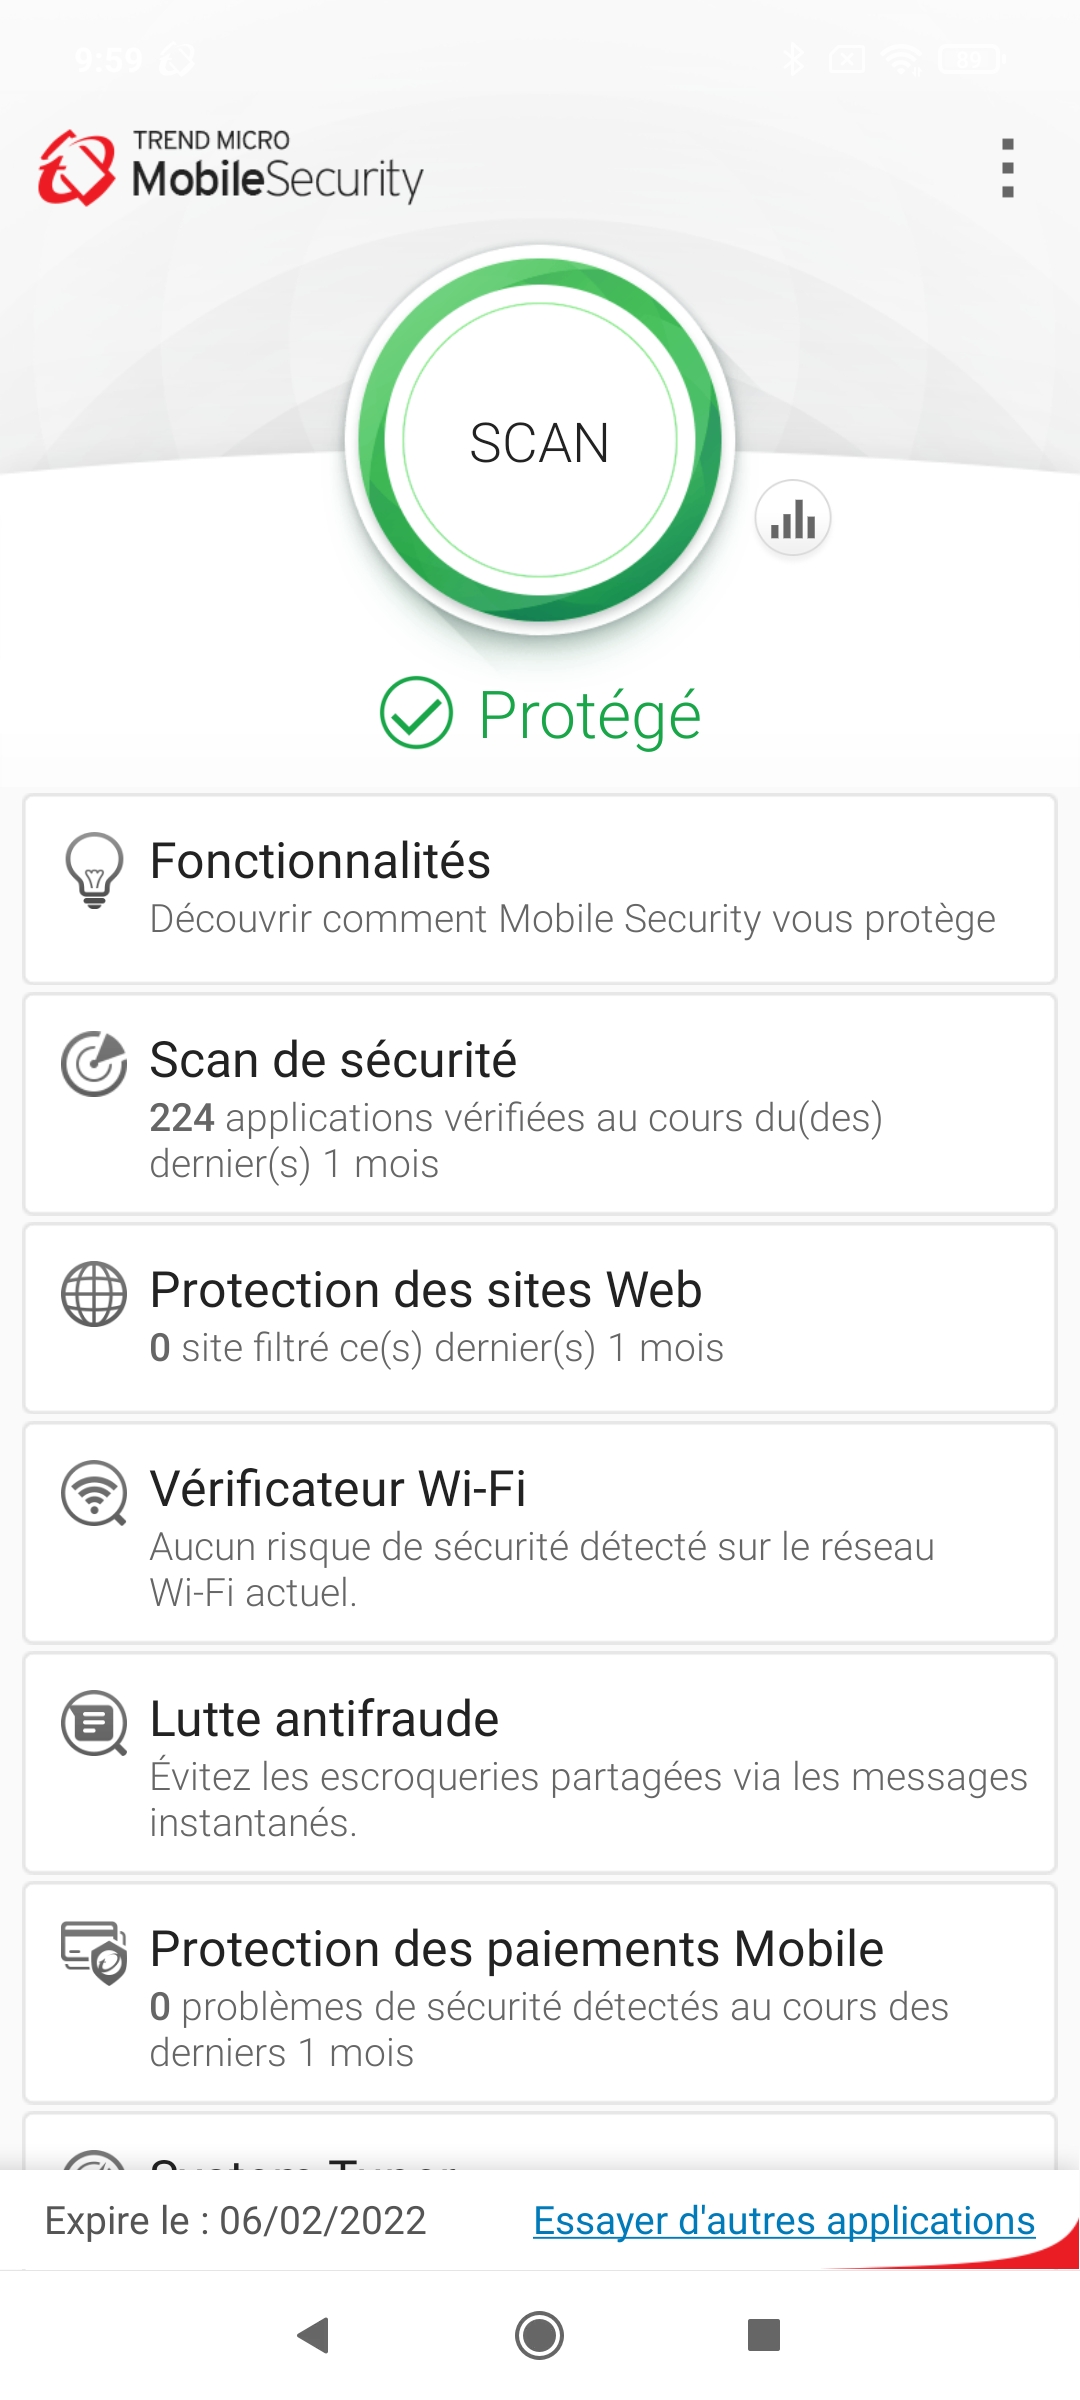 Trend Micro Mobile Security - Scan